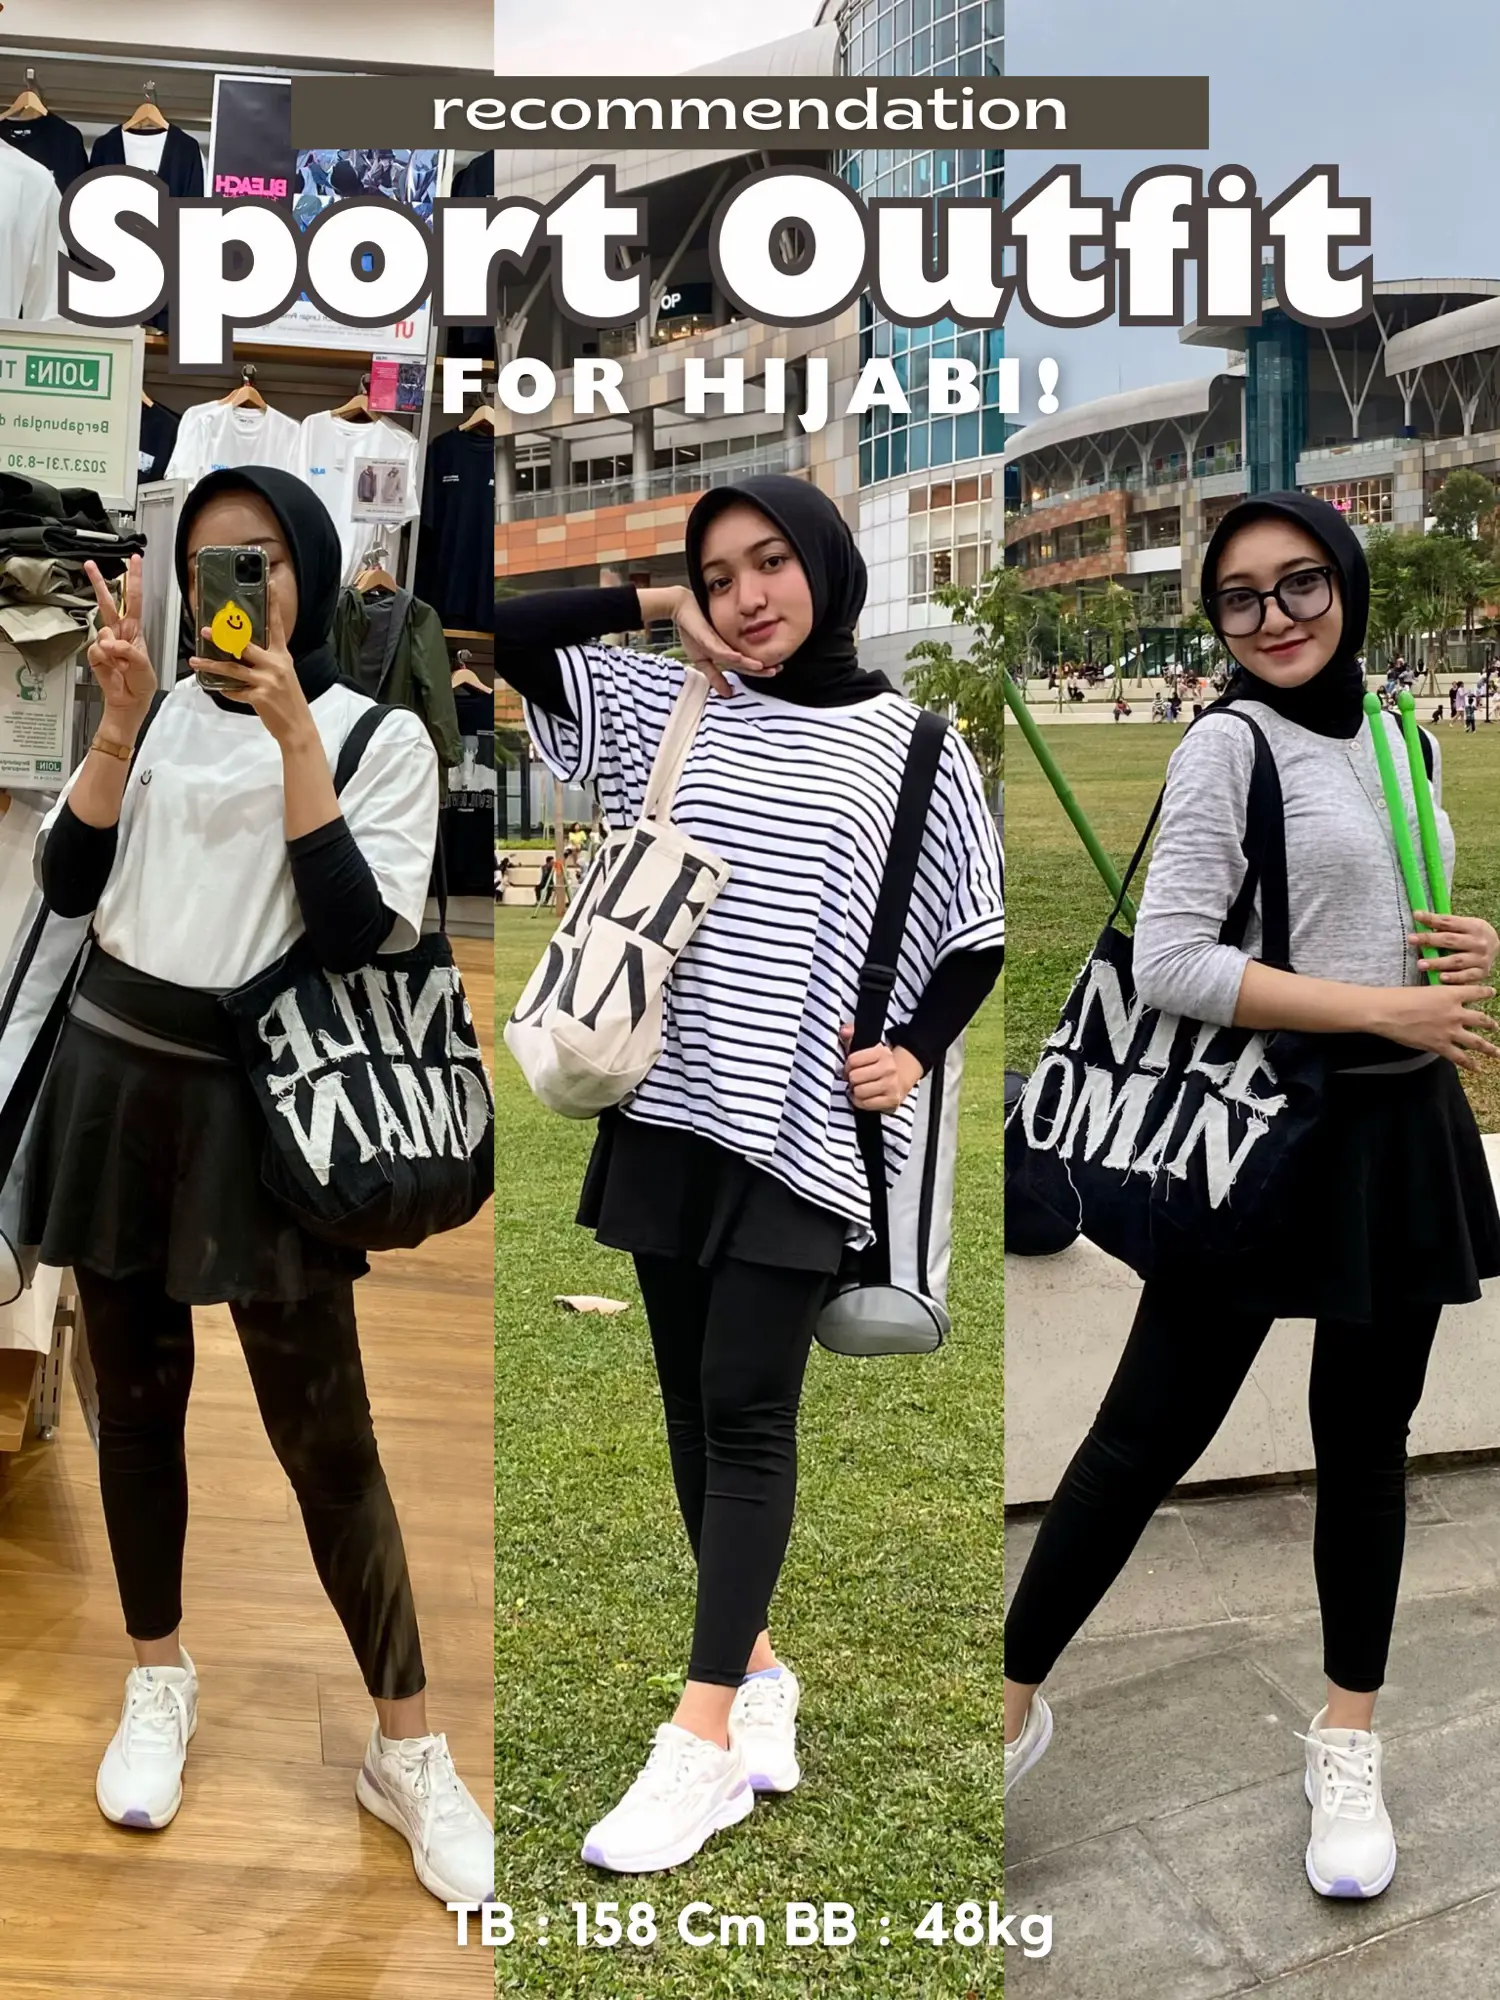 MIX N MATCH SPORT OUTFIT FOR HIJABI! SUPER AMAN!